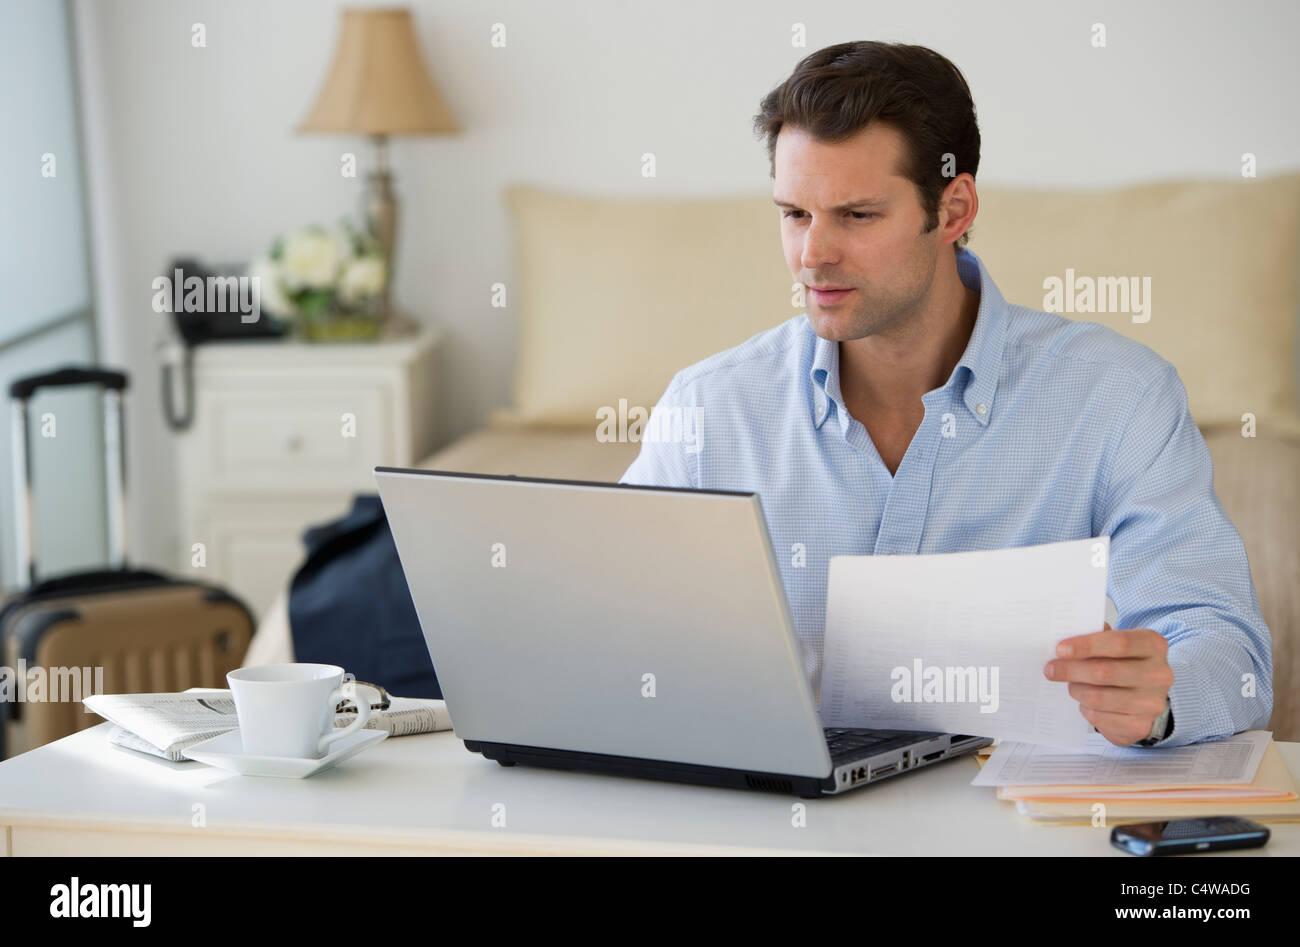 USA,New Jersey,Jersey City,man using laptop at home office Stock Photo